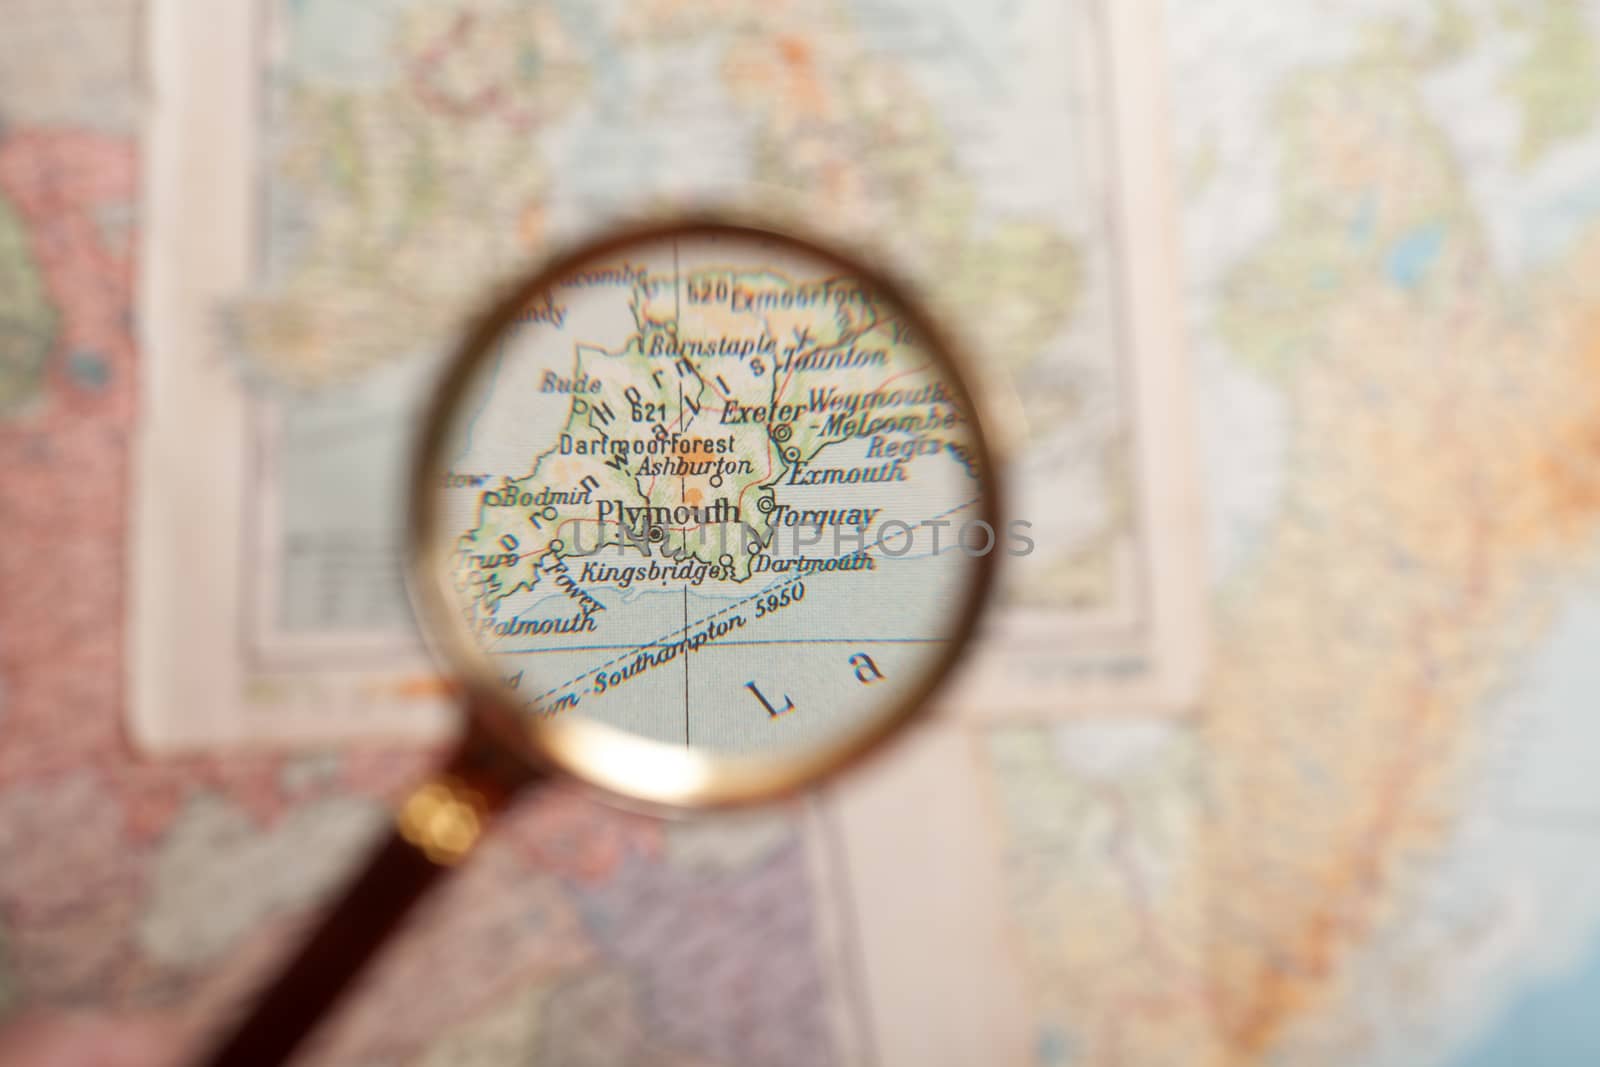 Magnifying glass in front of a Plymouth map